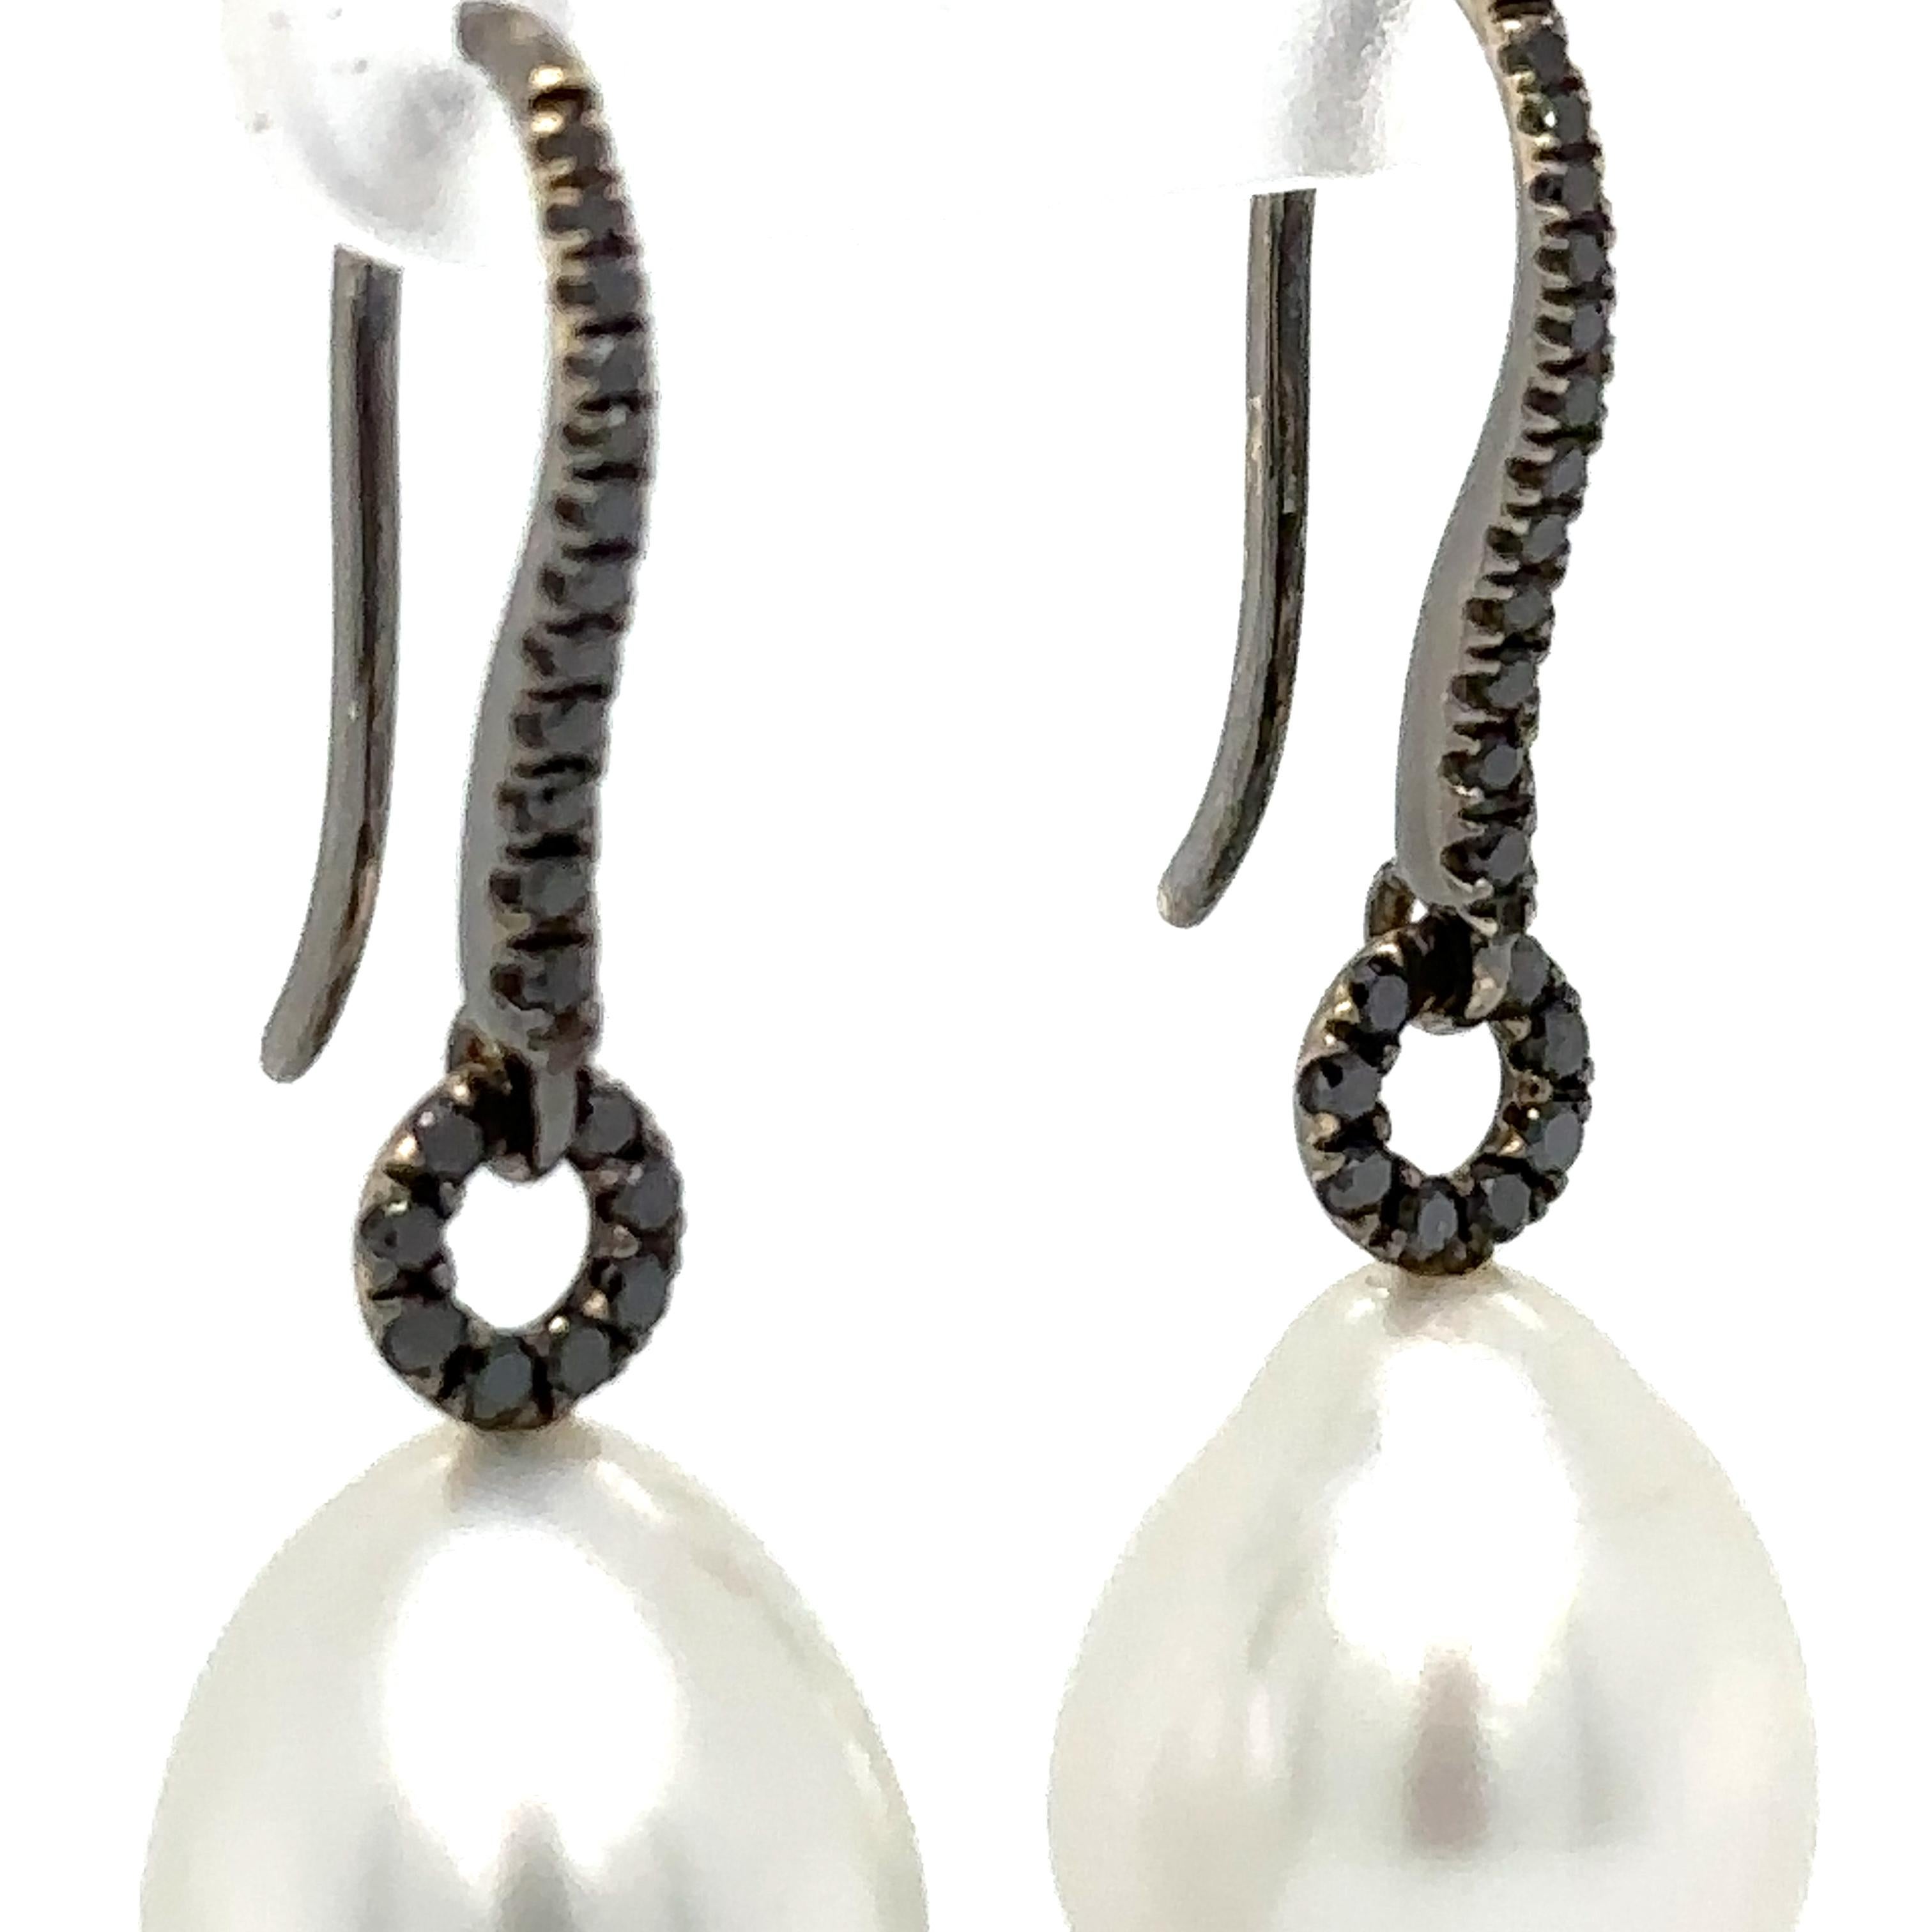 A Pair Of South Sea Pearl And Diamond Drop Earrings. Each earring with a drop shape South Sea cultured pearl below 21 treated black round diamonds claw set in 18ct black rhodium plated fittings.

Origin: Broome

Diamonds 42 = 0.31ct